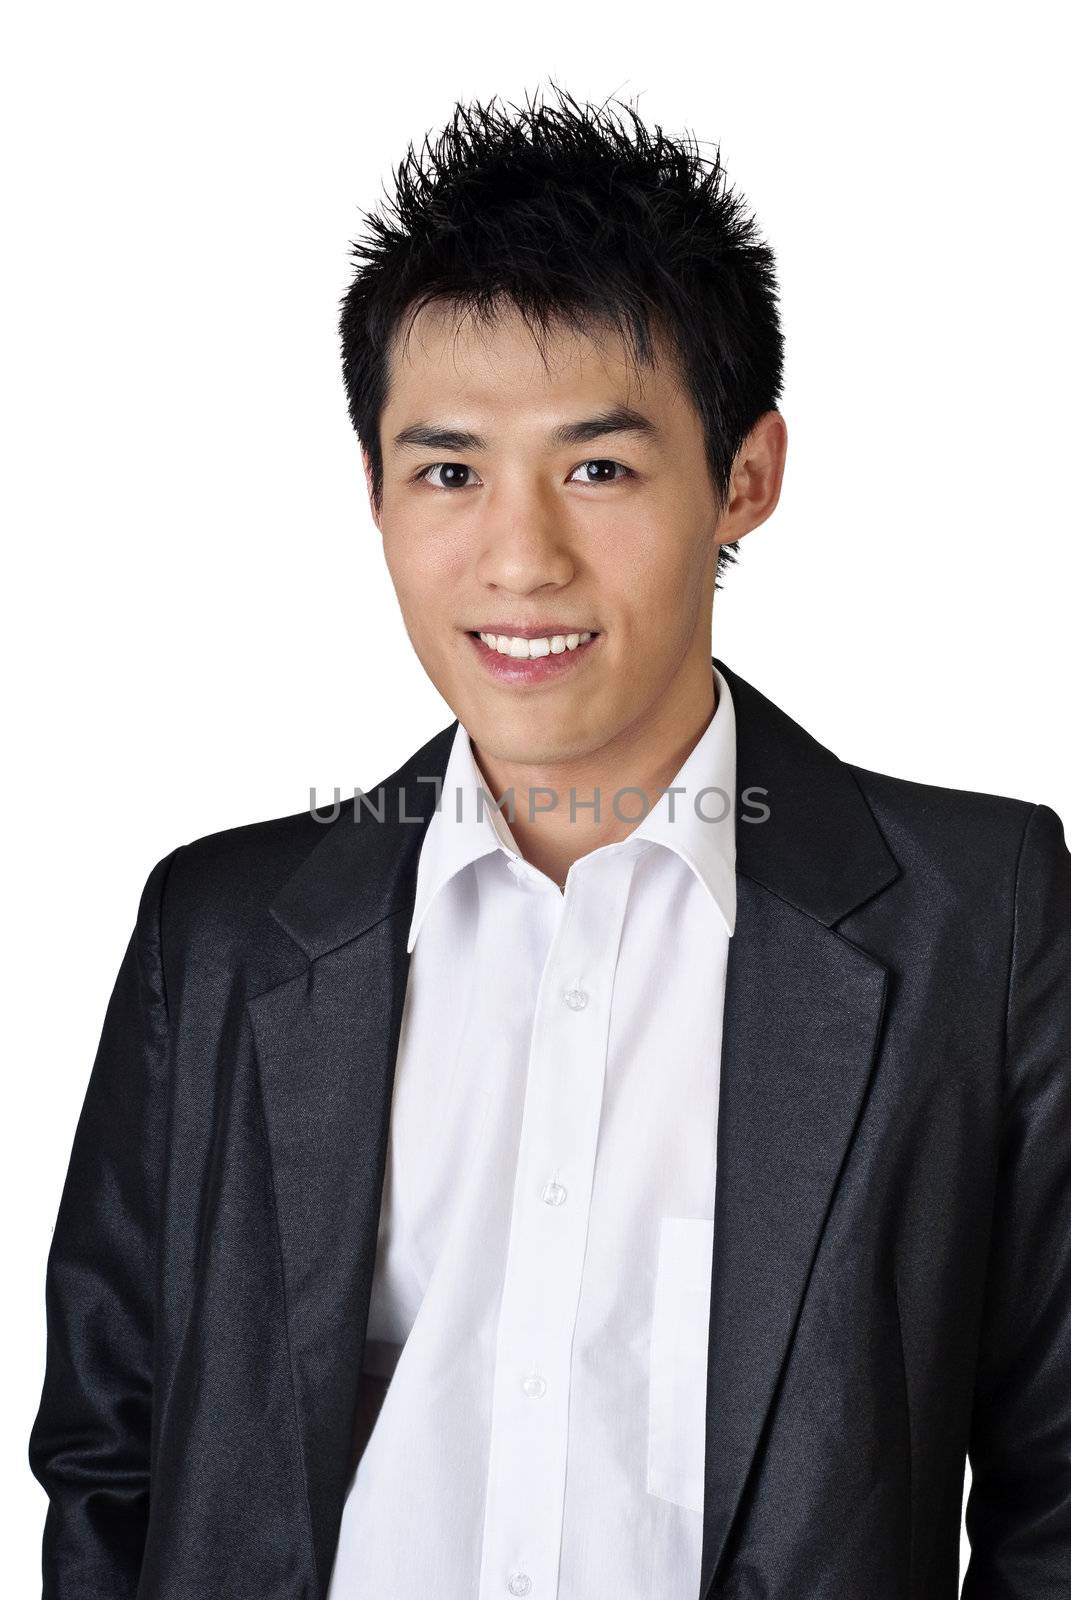 Asian businessman portrait with smiling face on white background.